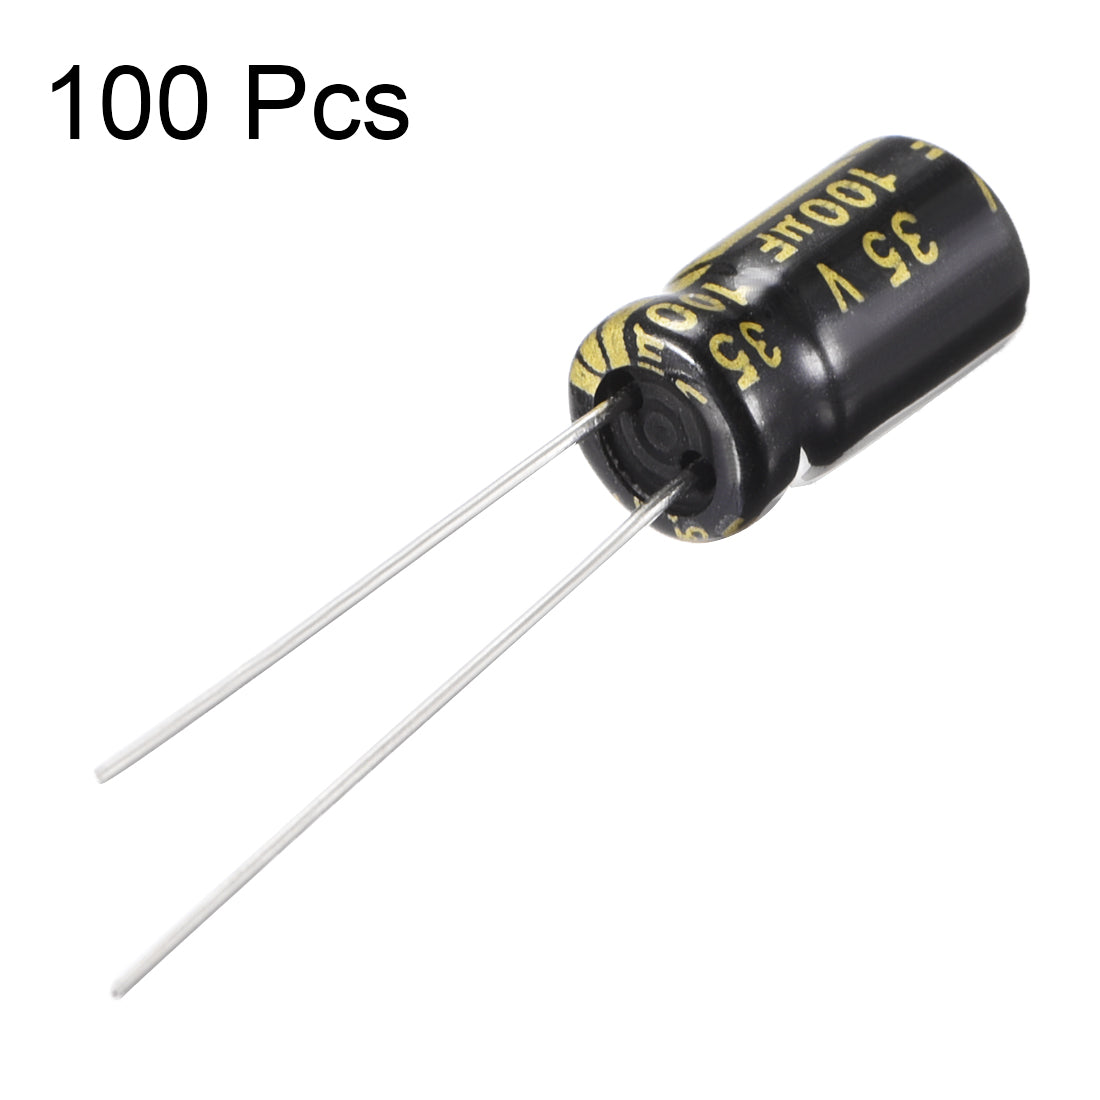 uxcell Uxcell Aluminum Radial Electrolytic Capacitor with 100uF 35V 105 Celsius Life 2000H 6.3 x 11 mm Black 100pcs